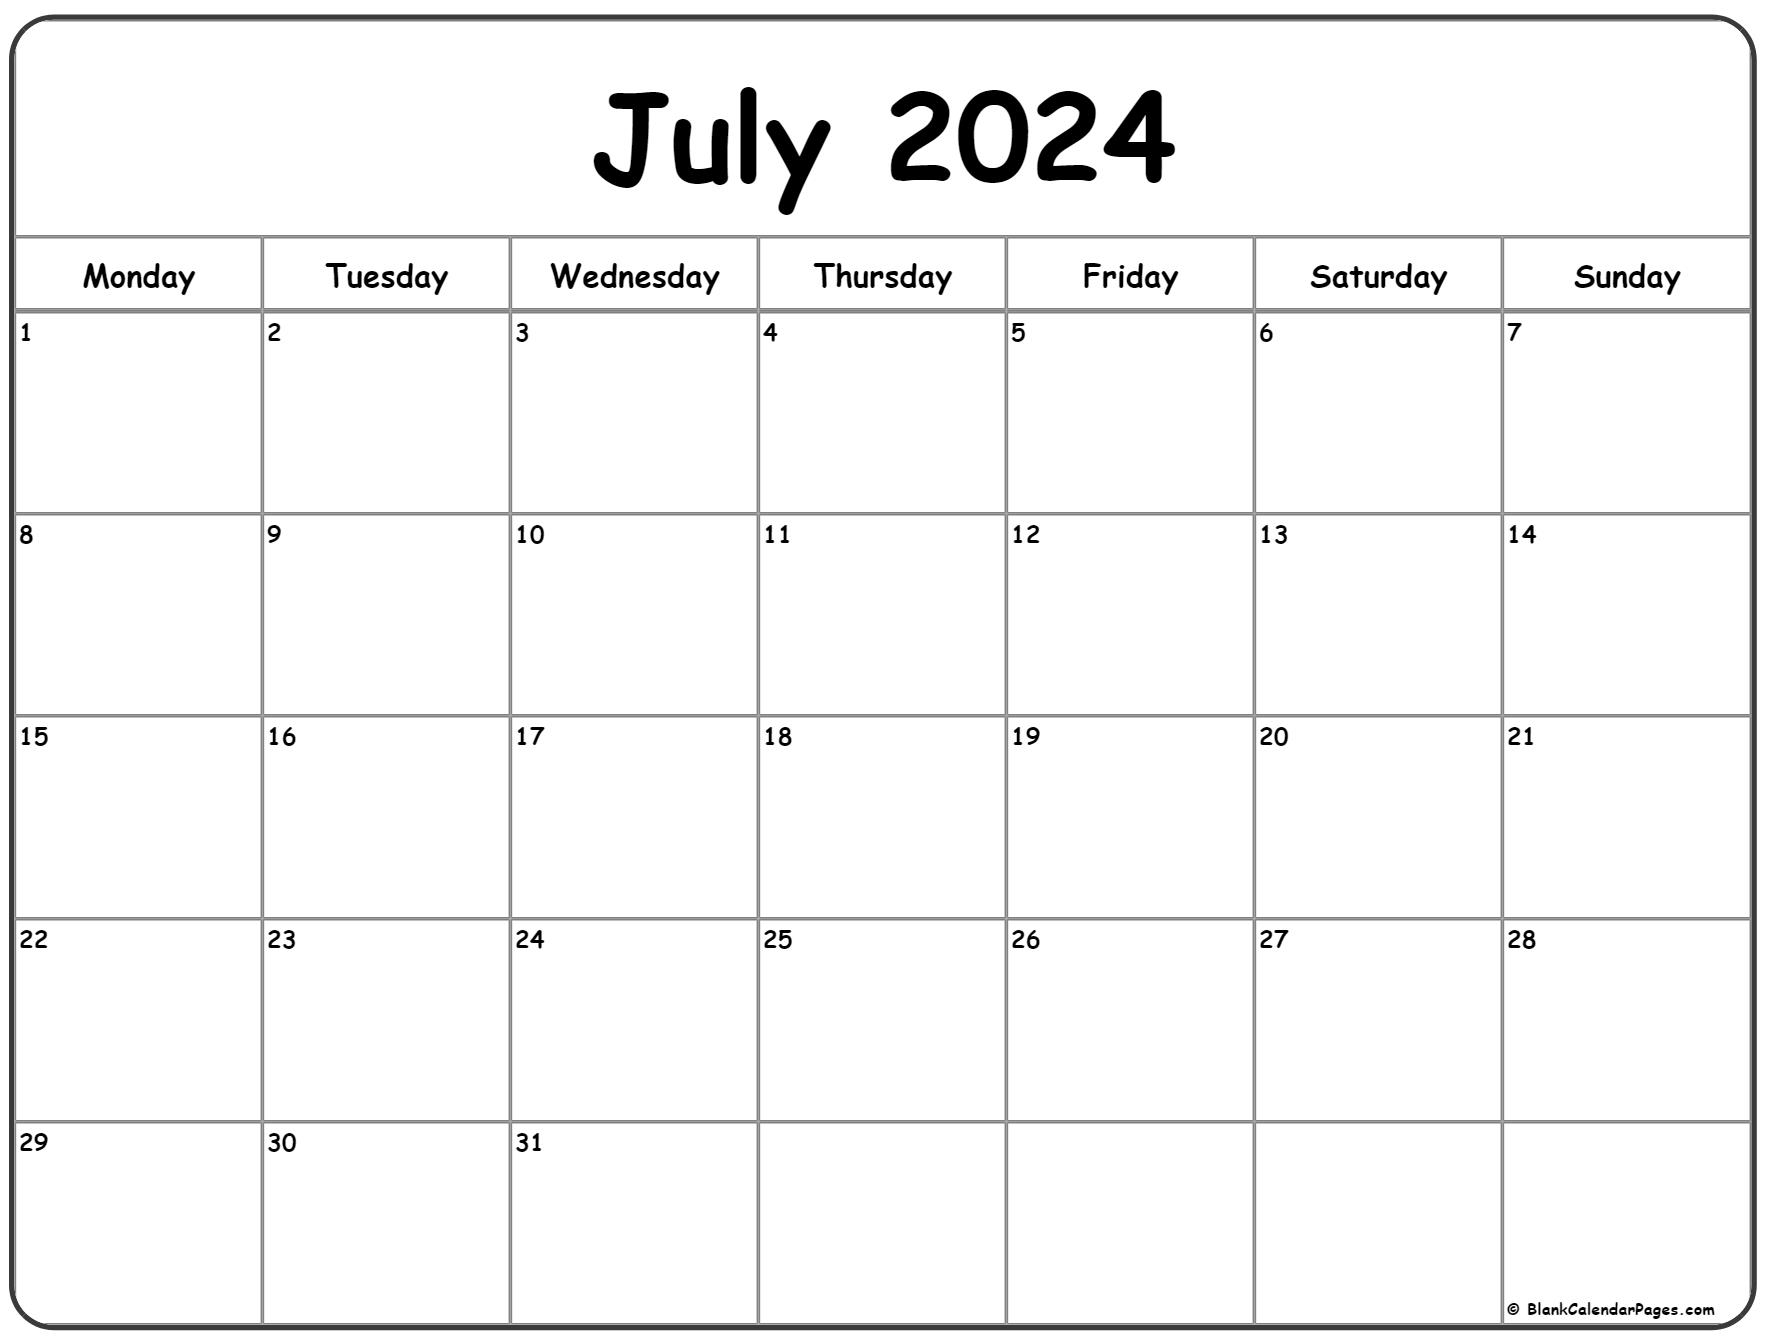 July 2024 Monday Calendar | Monday To Sunday for July 2024 Weekly Calendar Printable